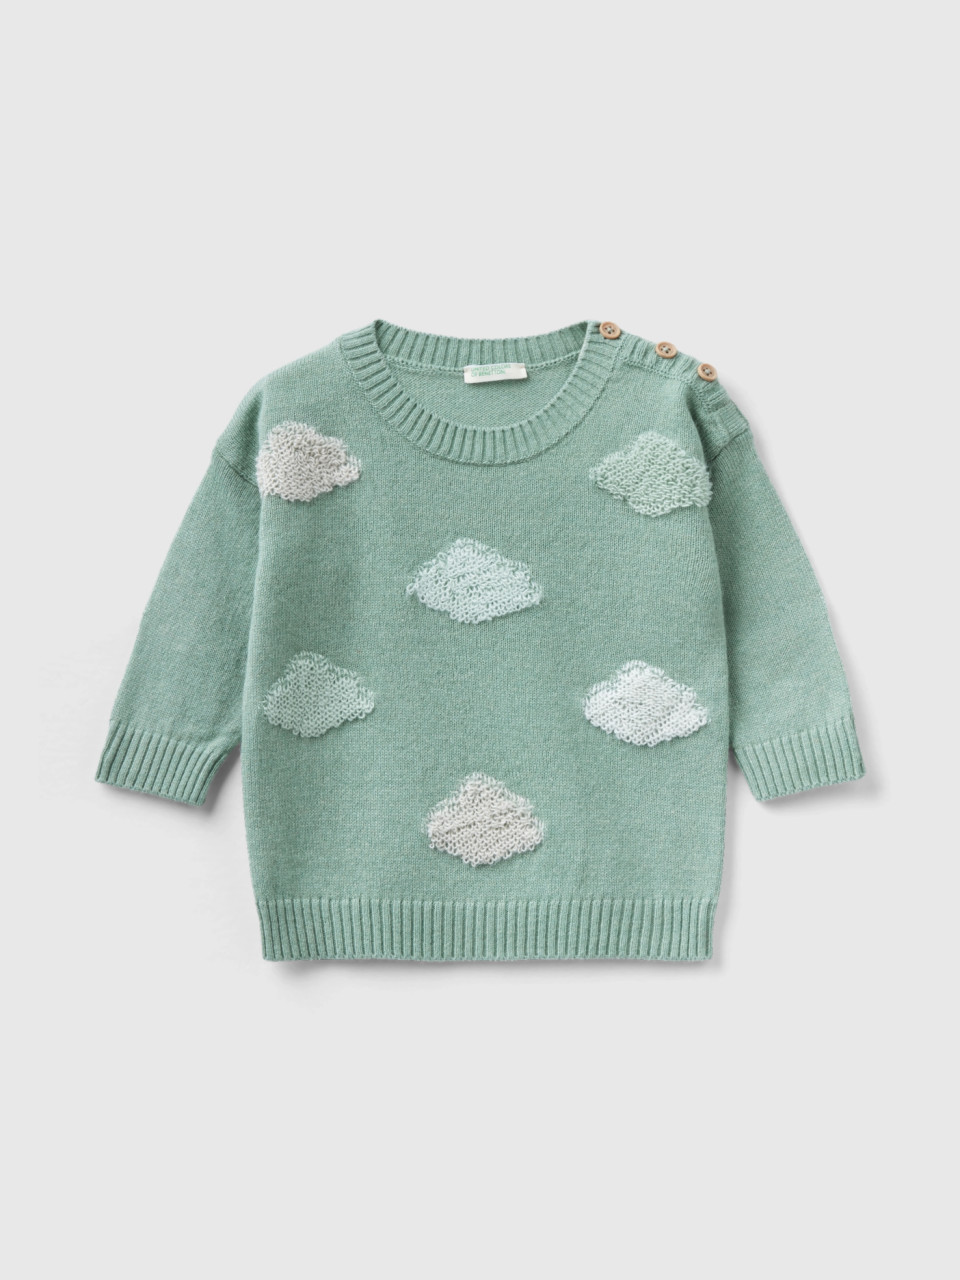 Benetton, Sweater With Clouds In Recycled Wool Blend, Aqua, Kids